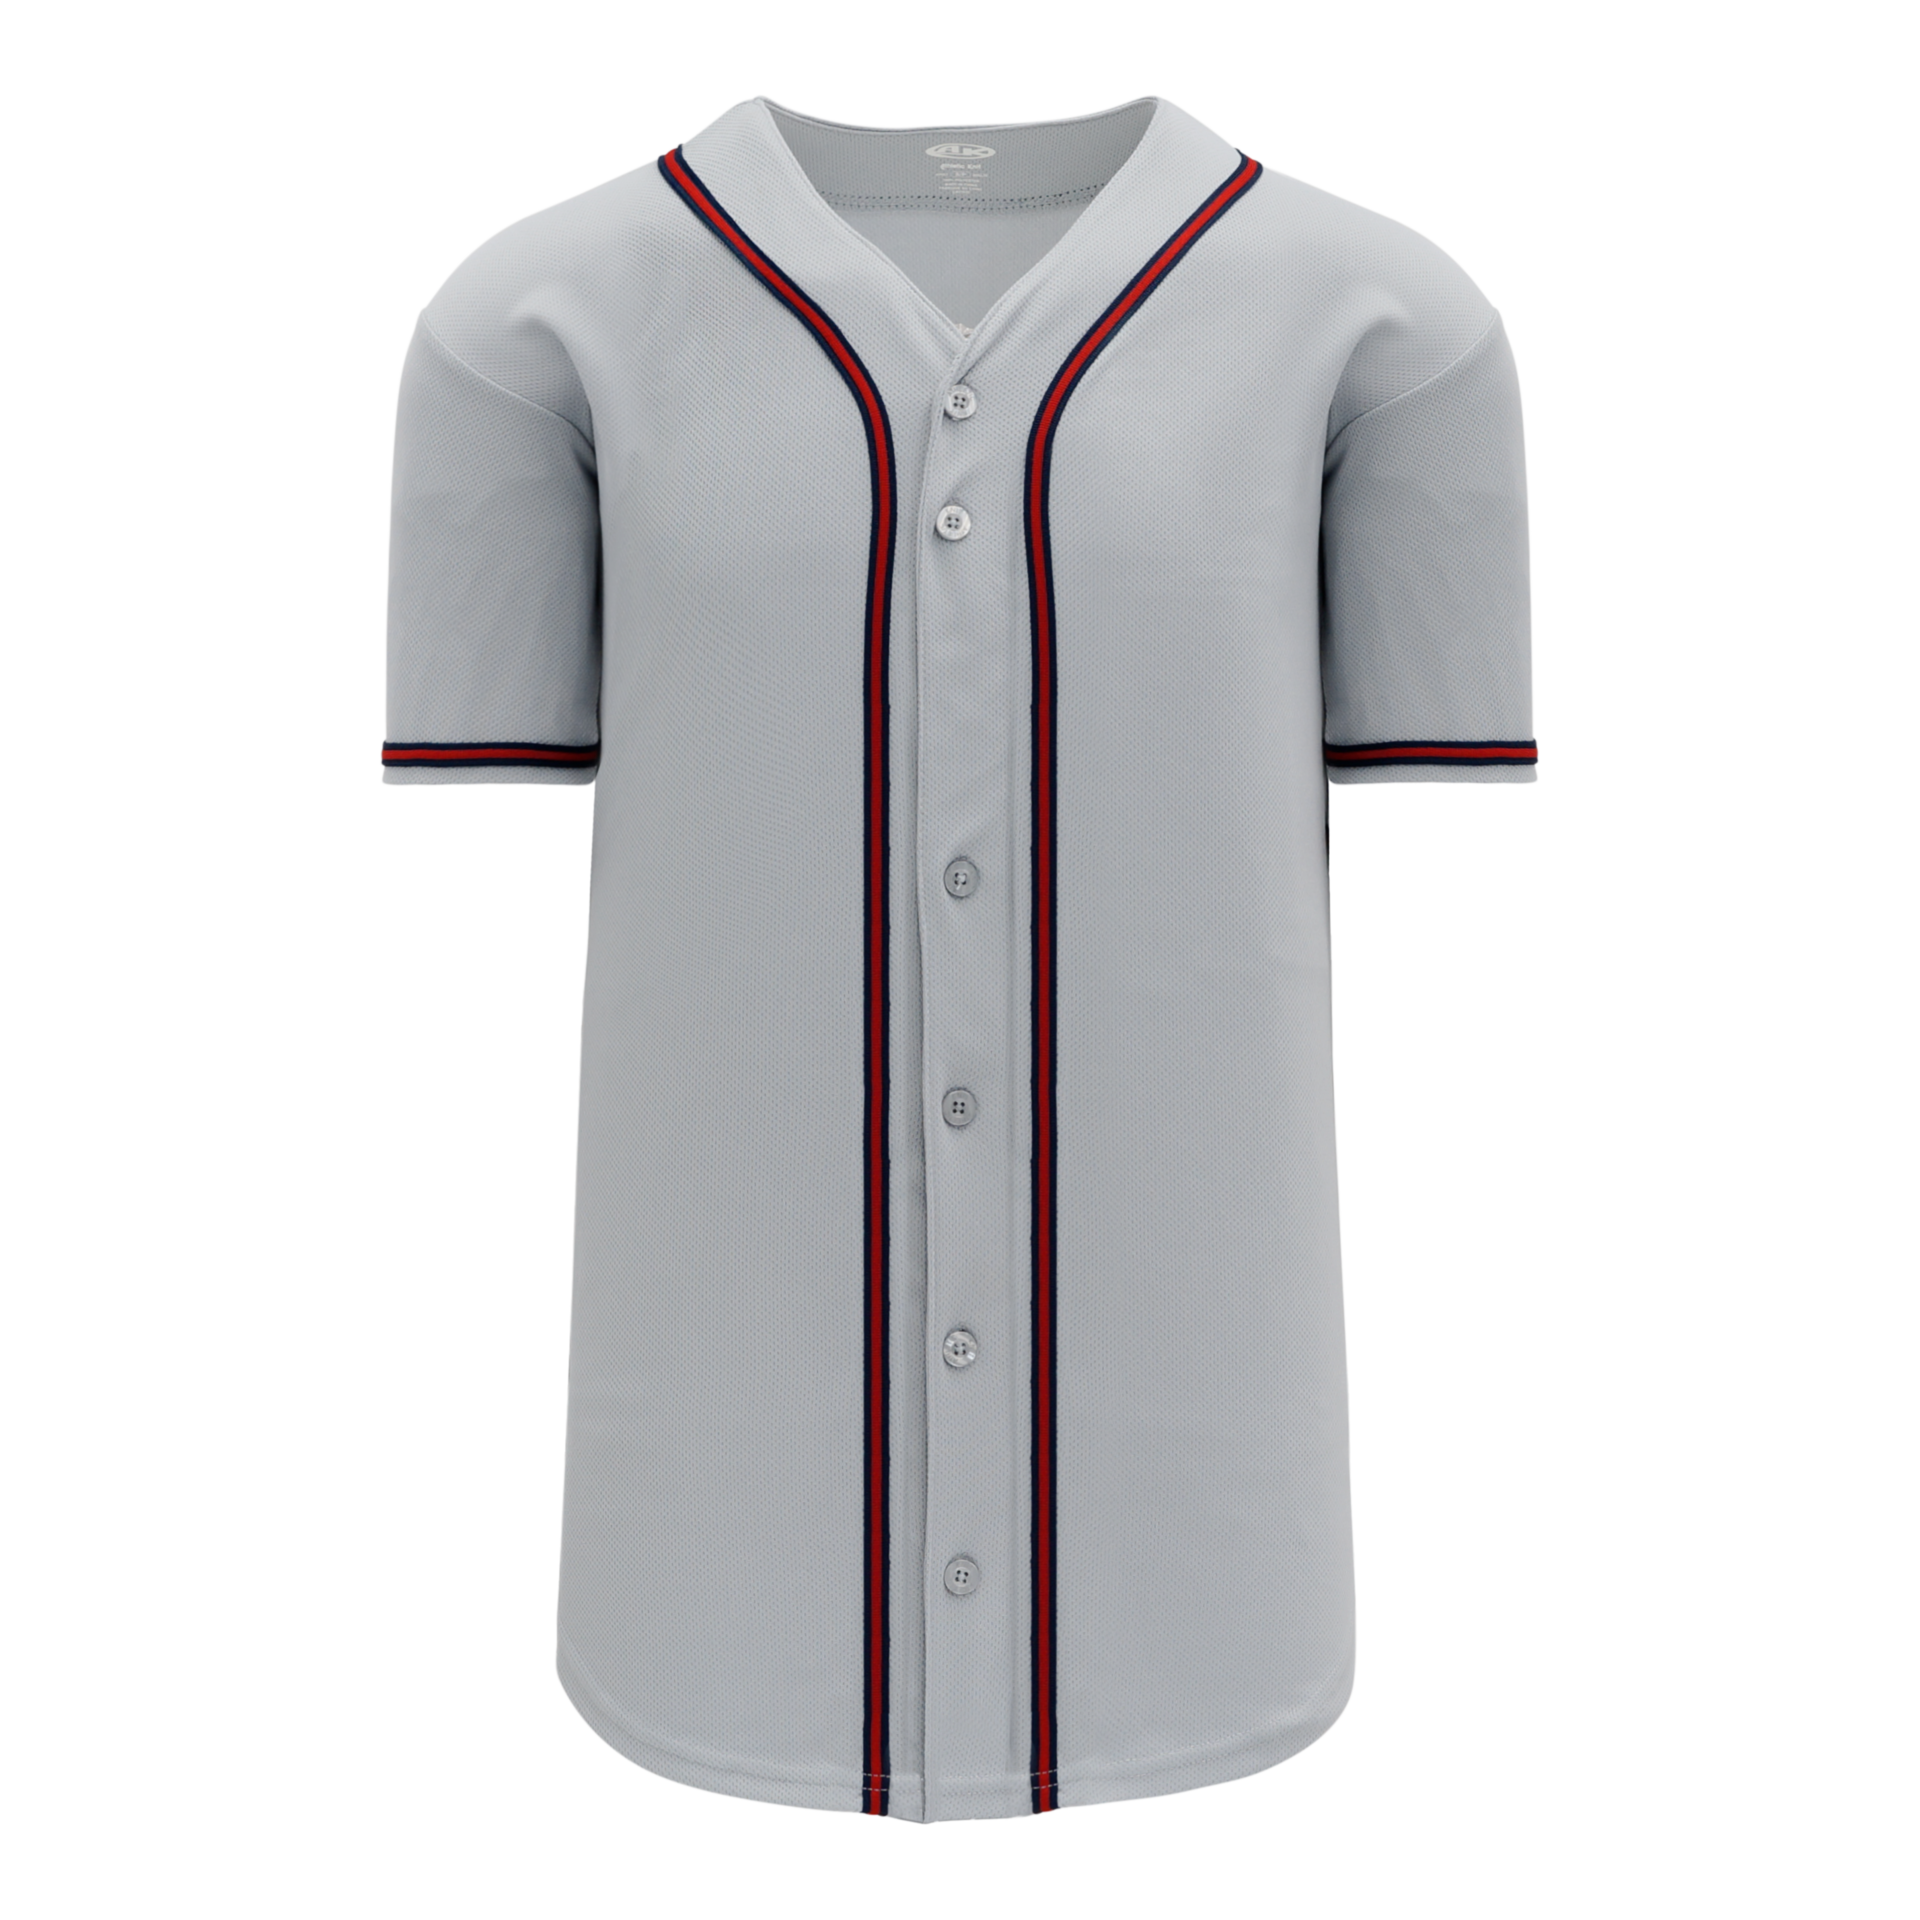  Custom Baseball Jersey Practice Team Custom Team Name Number  Stitched Baseball Jersey for Youth S-XL : Clothing, Shoes & Jewelry